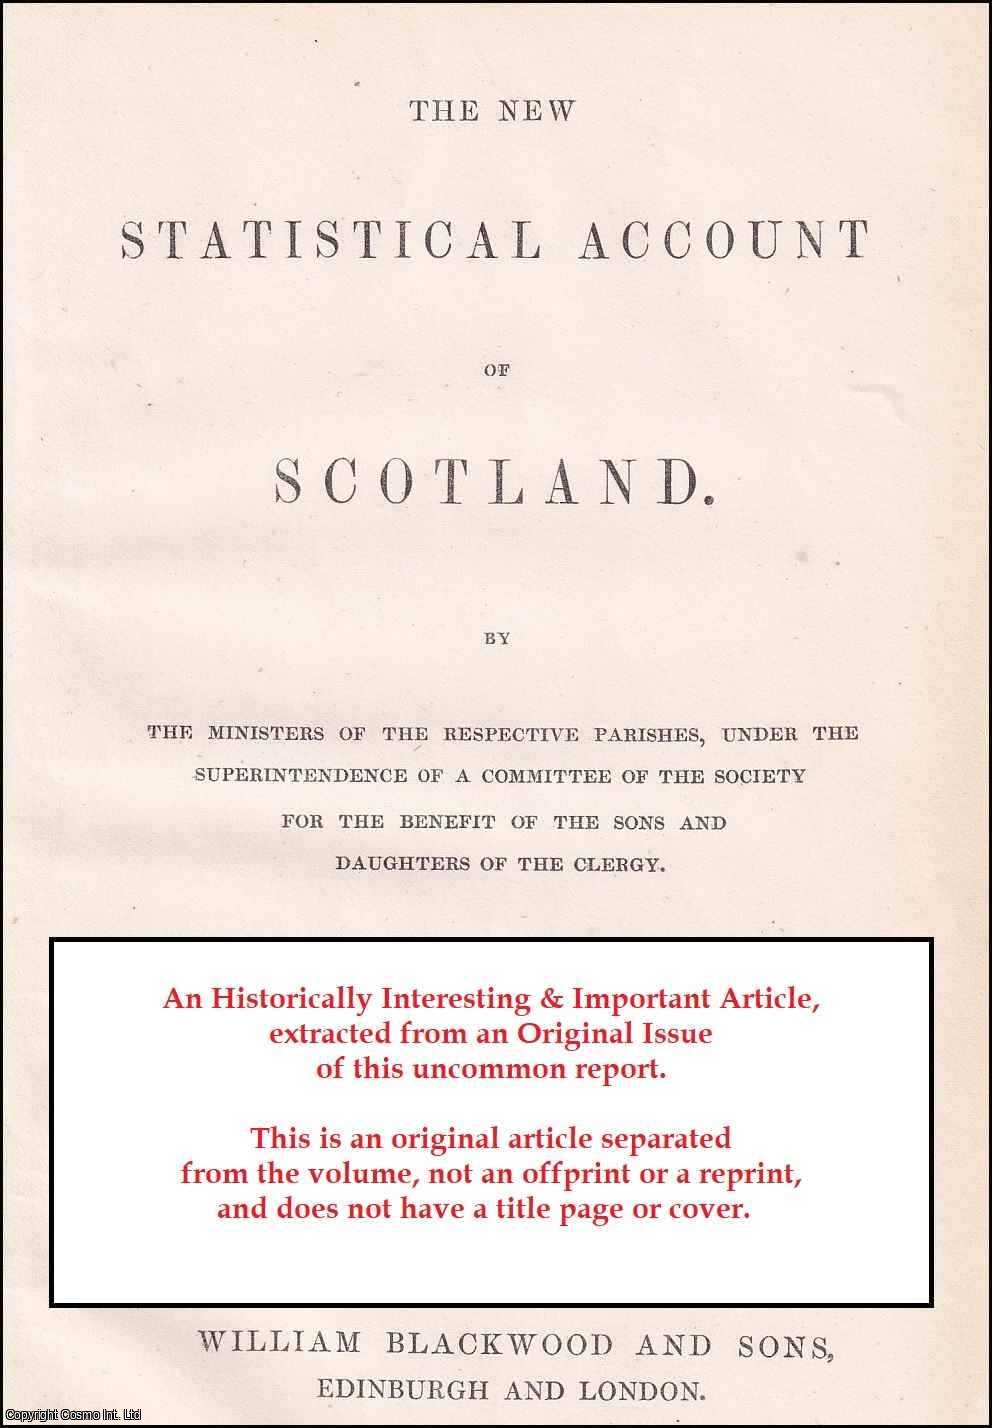 Rev. Michael Stewart Johnstone - Parish of Minnigaff. Presbytery of Wigton, Synod of Galloway. An uncommon original article from The New Statistical Account of Scotland, 1845.